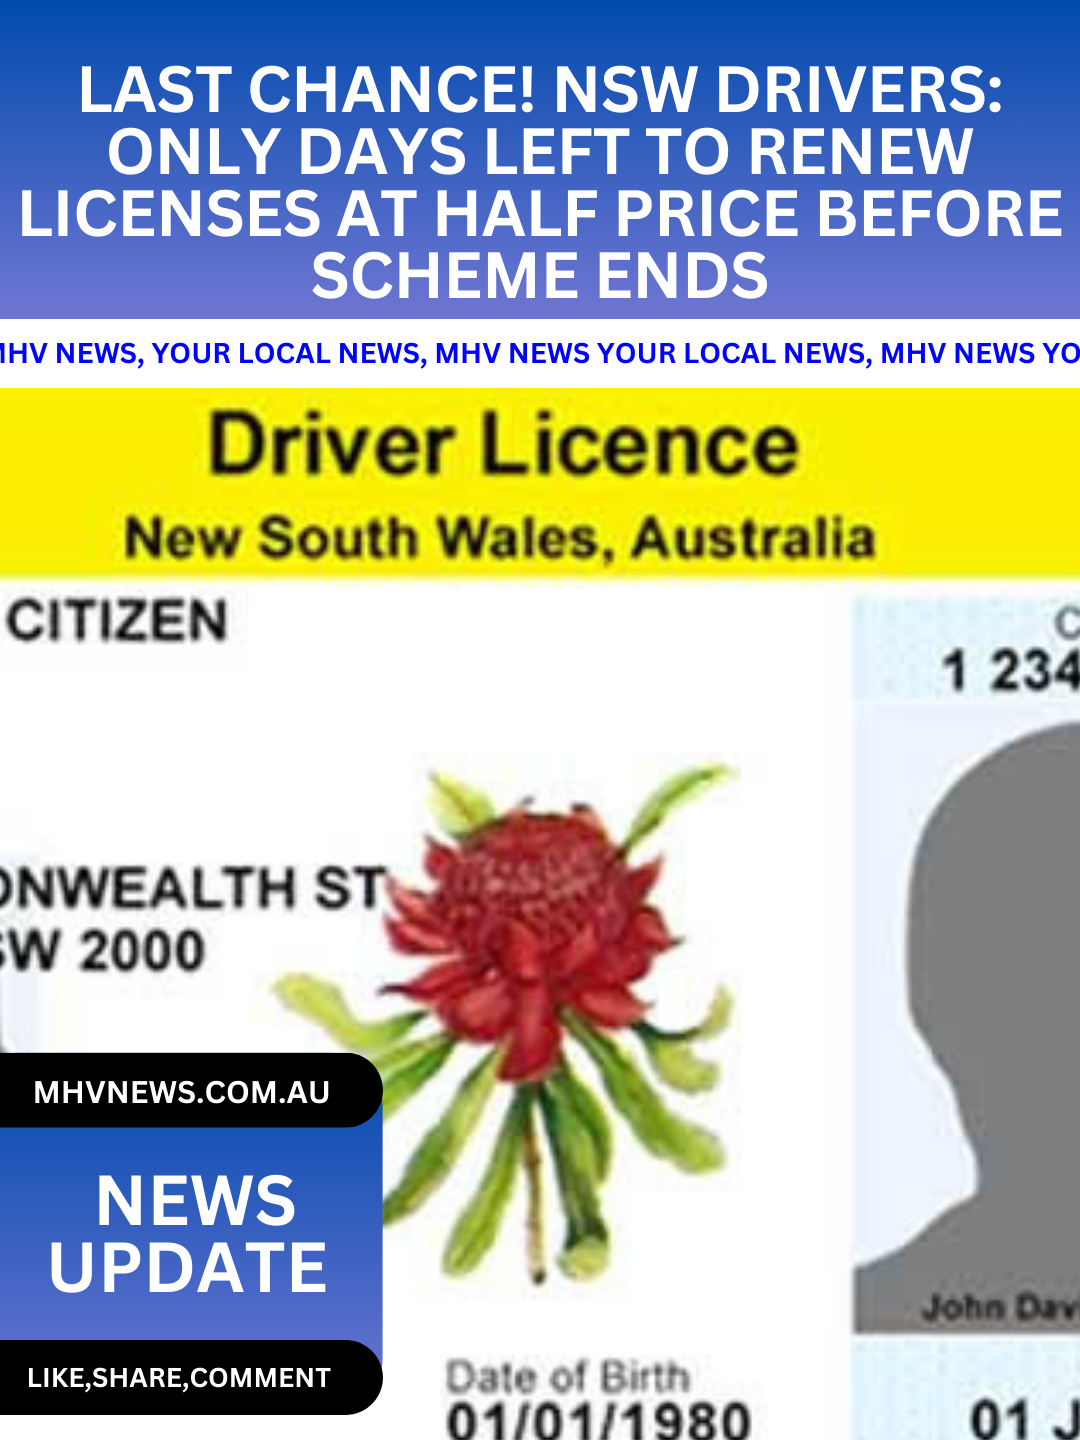 You are currently viewing Last Chance! NSW Drivers: Only Days Left to Renew Licenses at Half Price Before Scheme Ends